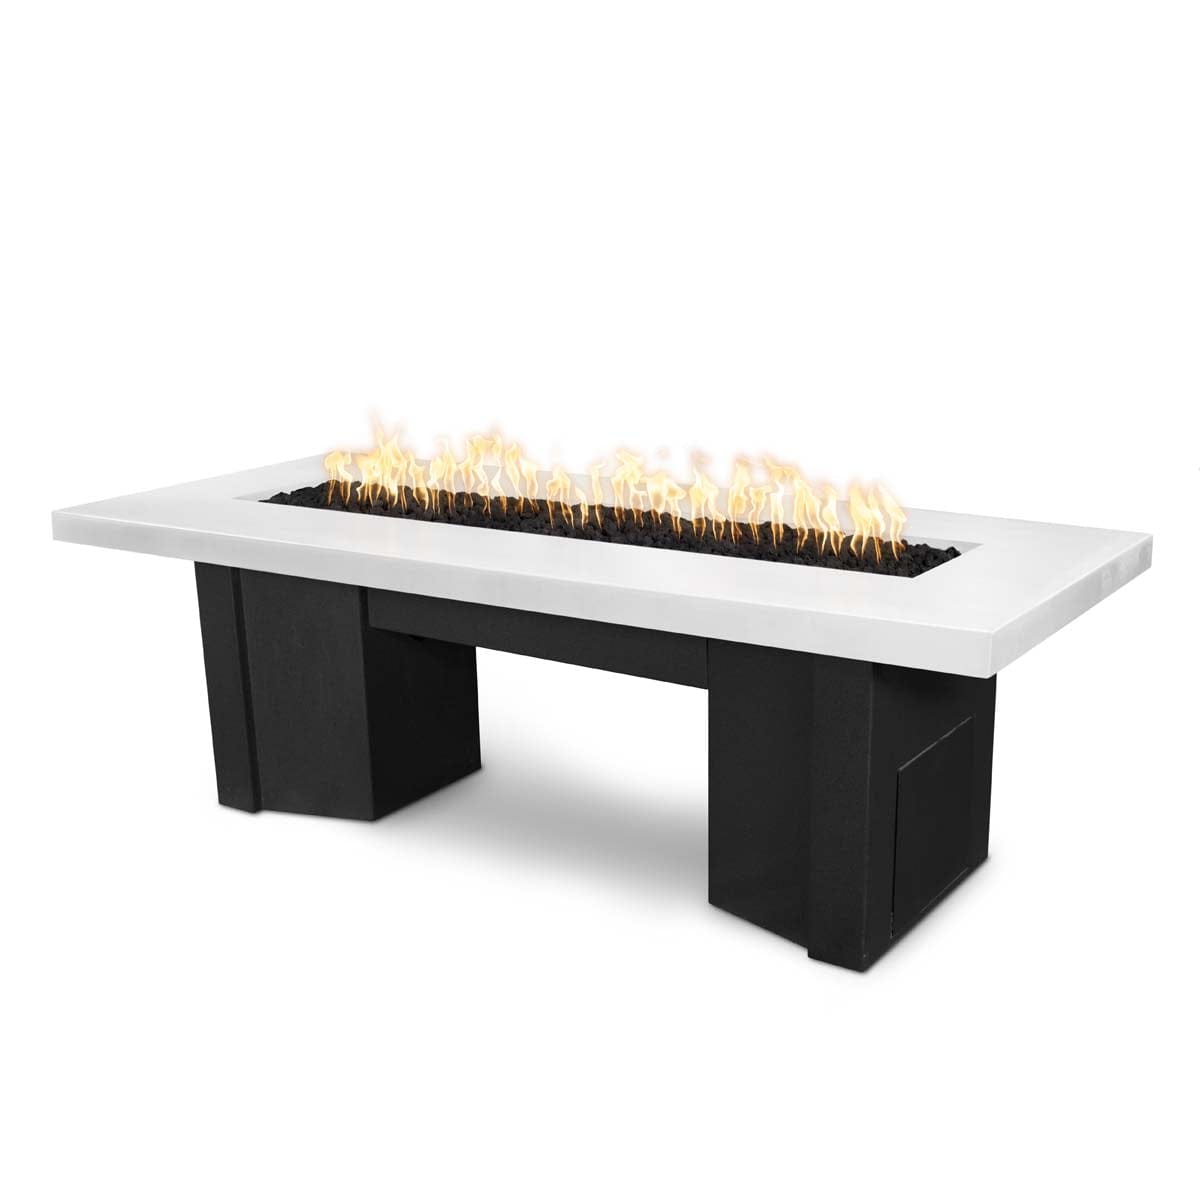 The Outdoor Plus Fire Features Limestone (-LIM) / Black Powder Coated Steel (-BLK) The Outdoor Plus 78&quot; Alameda Fire Table Smooth Concrete in Natural Gas - Flame Sense System with Push Button Spark Igniter / OPT-ALMGFRC78FSEN-NG